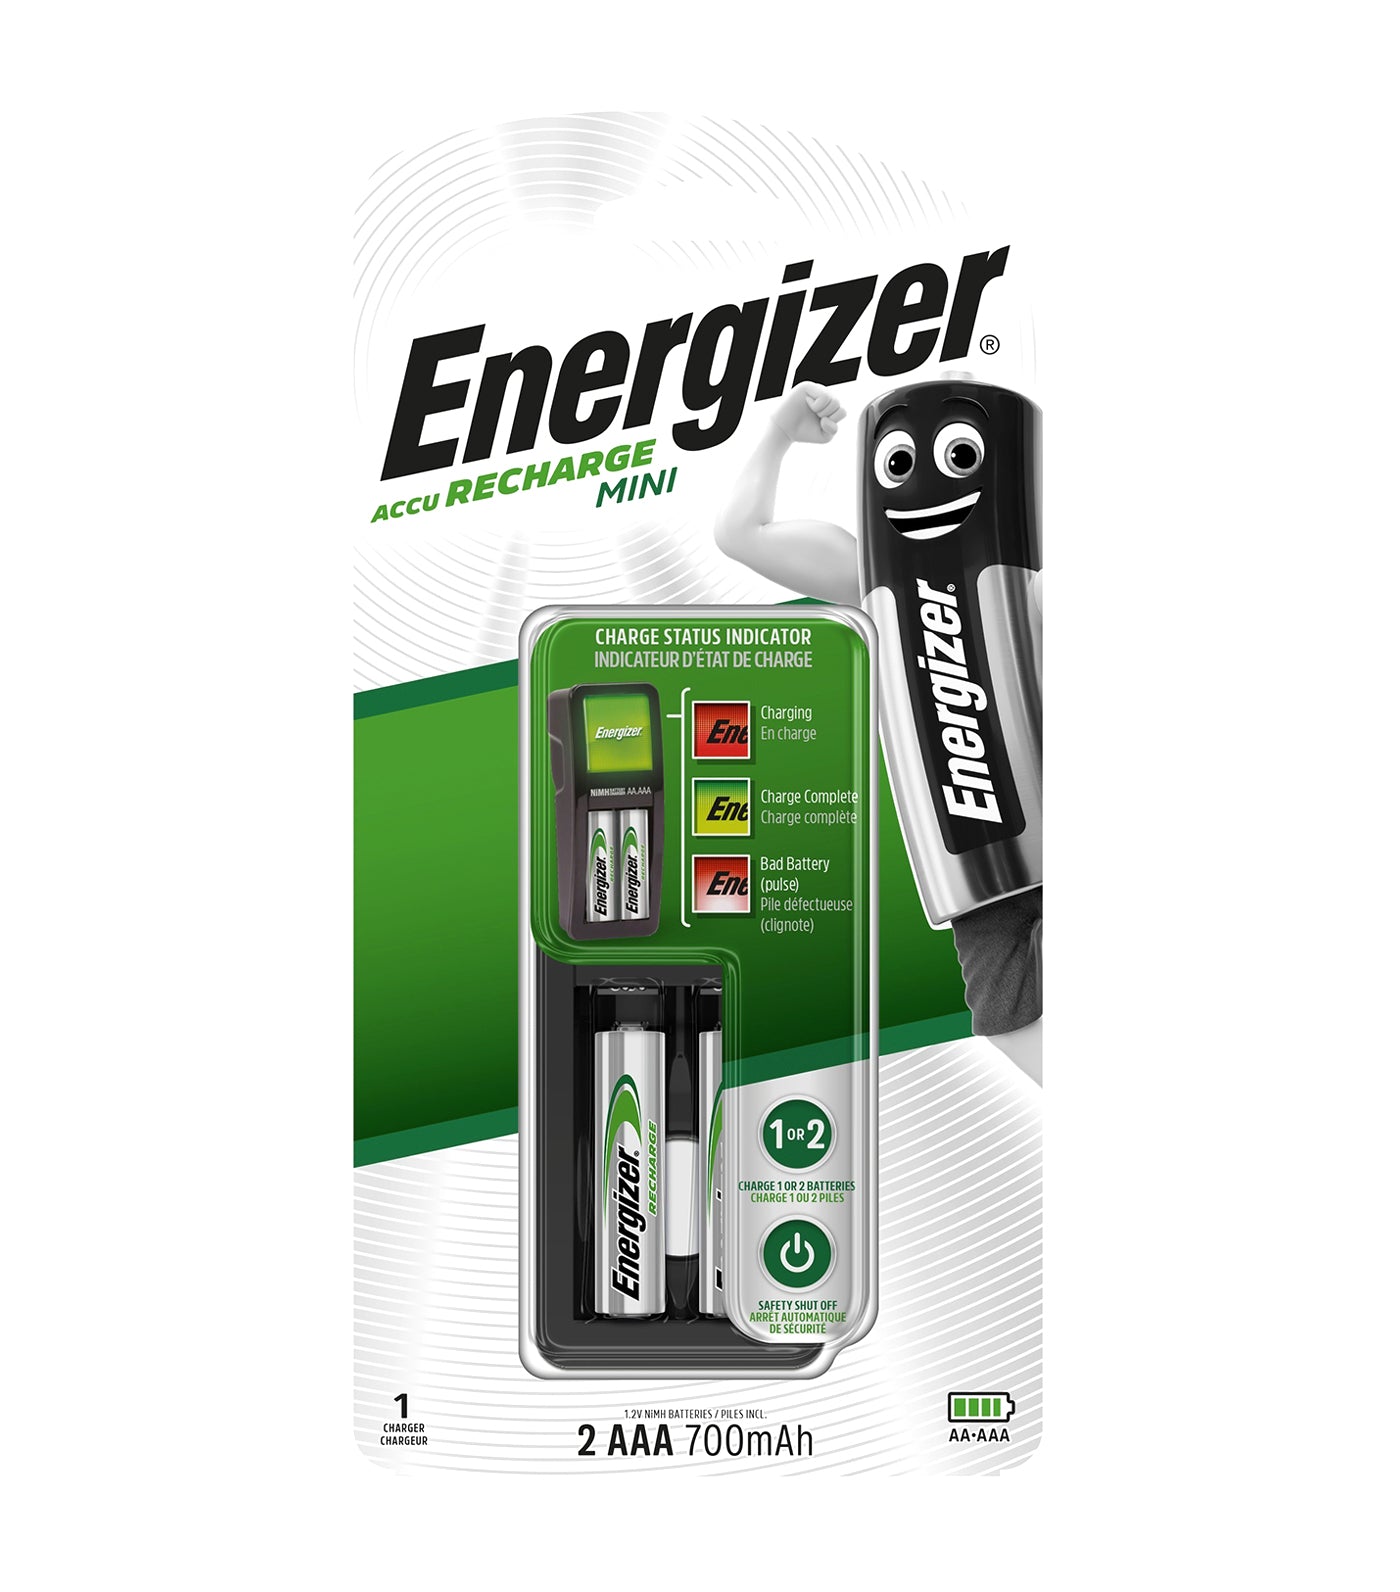 energizer accurecharge mini with 2 pieces aaa batteries